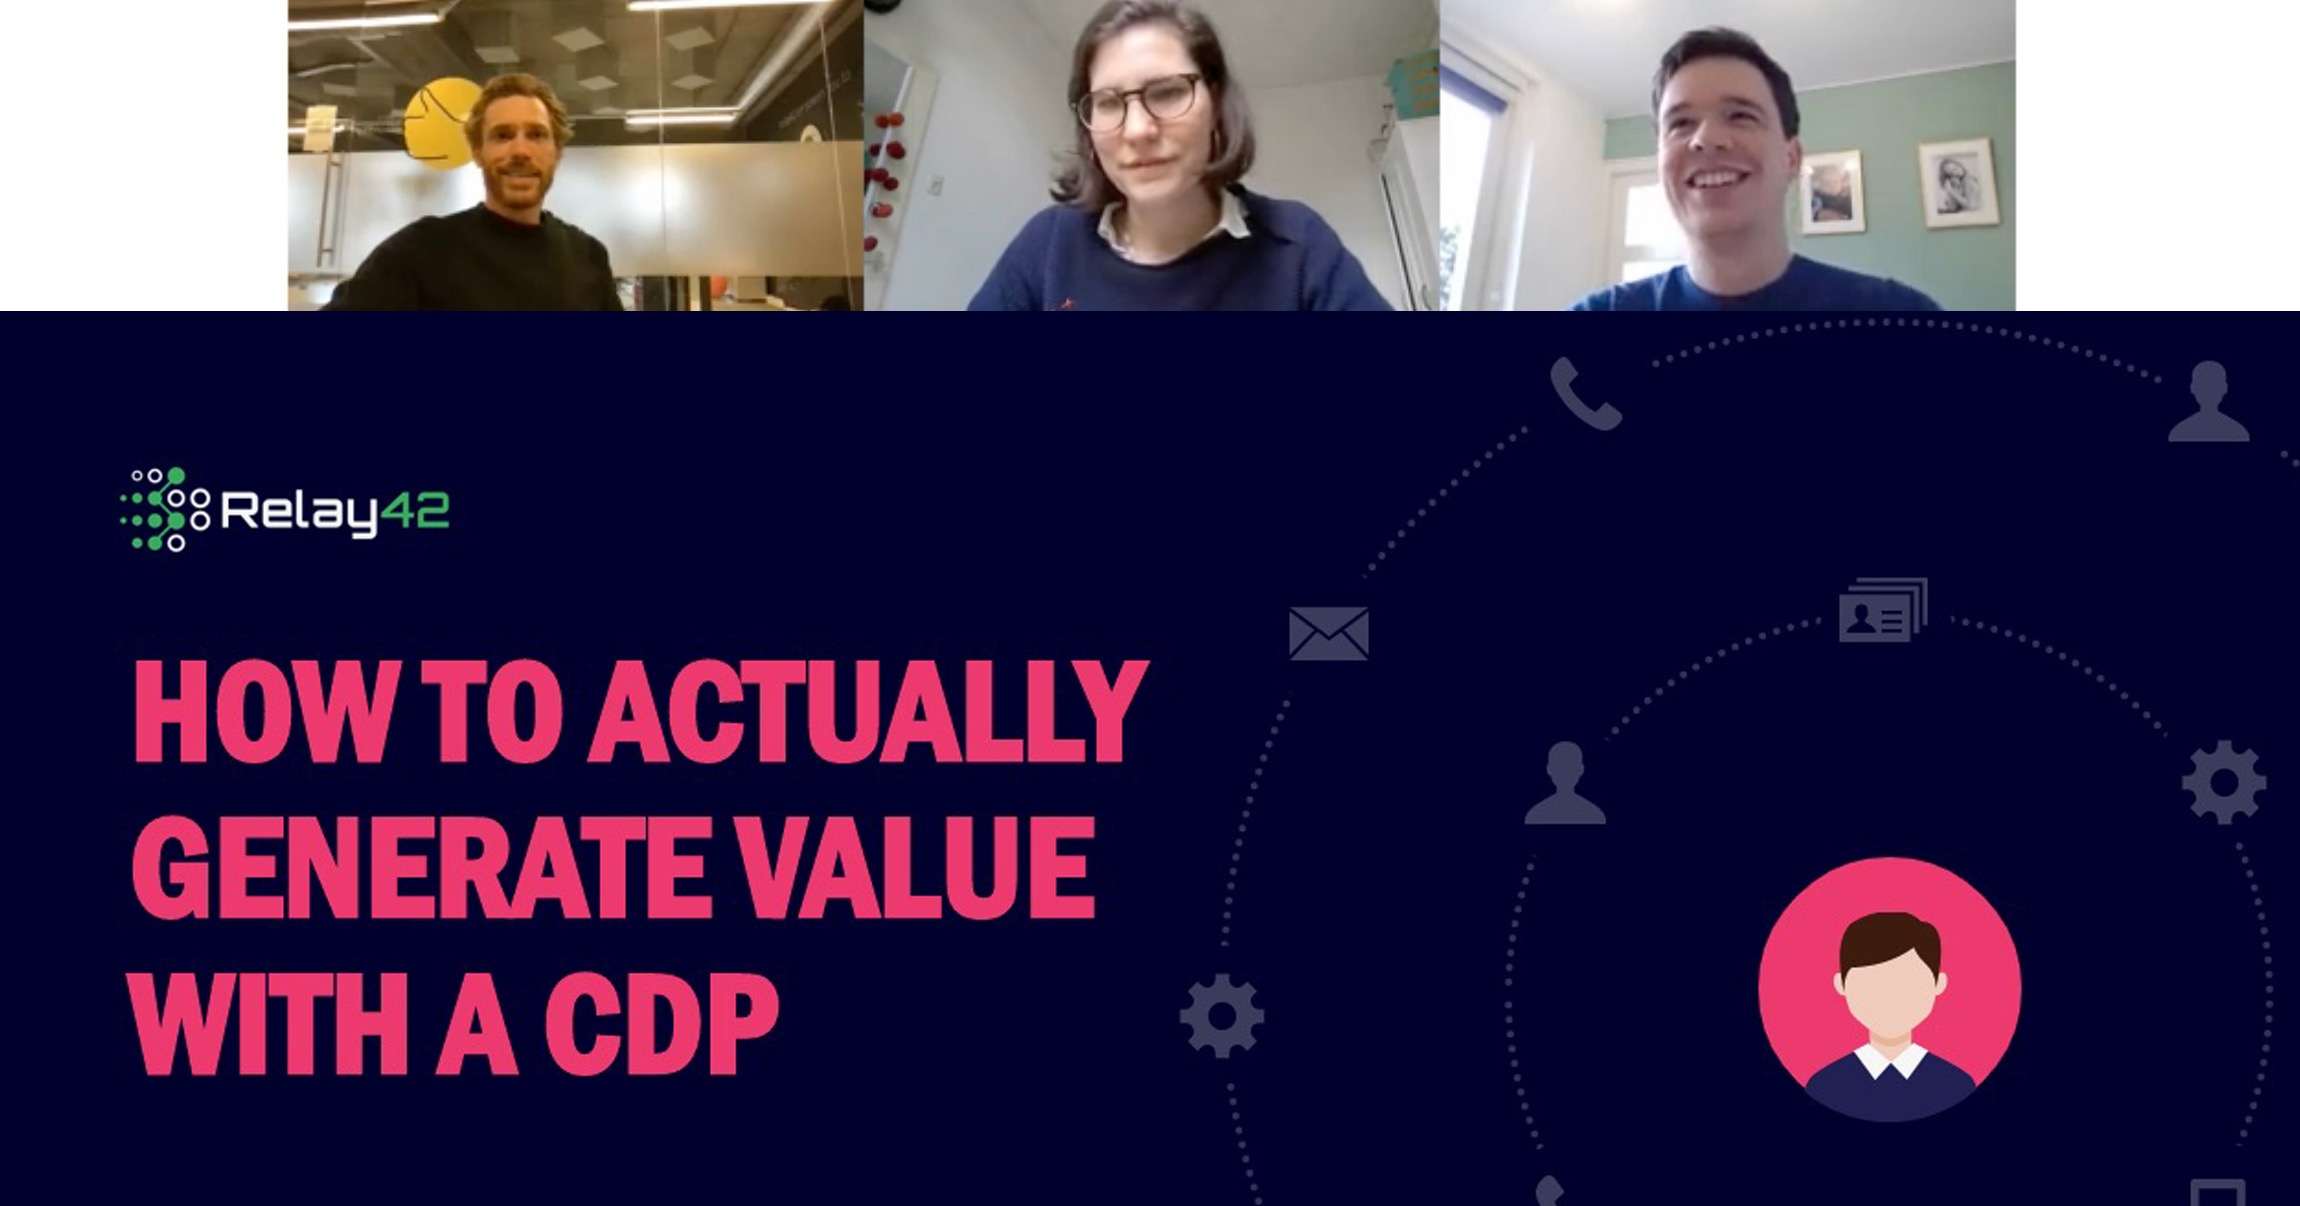 Video: On-Demand Webinar: How to Actually Generate Value with a CDP